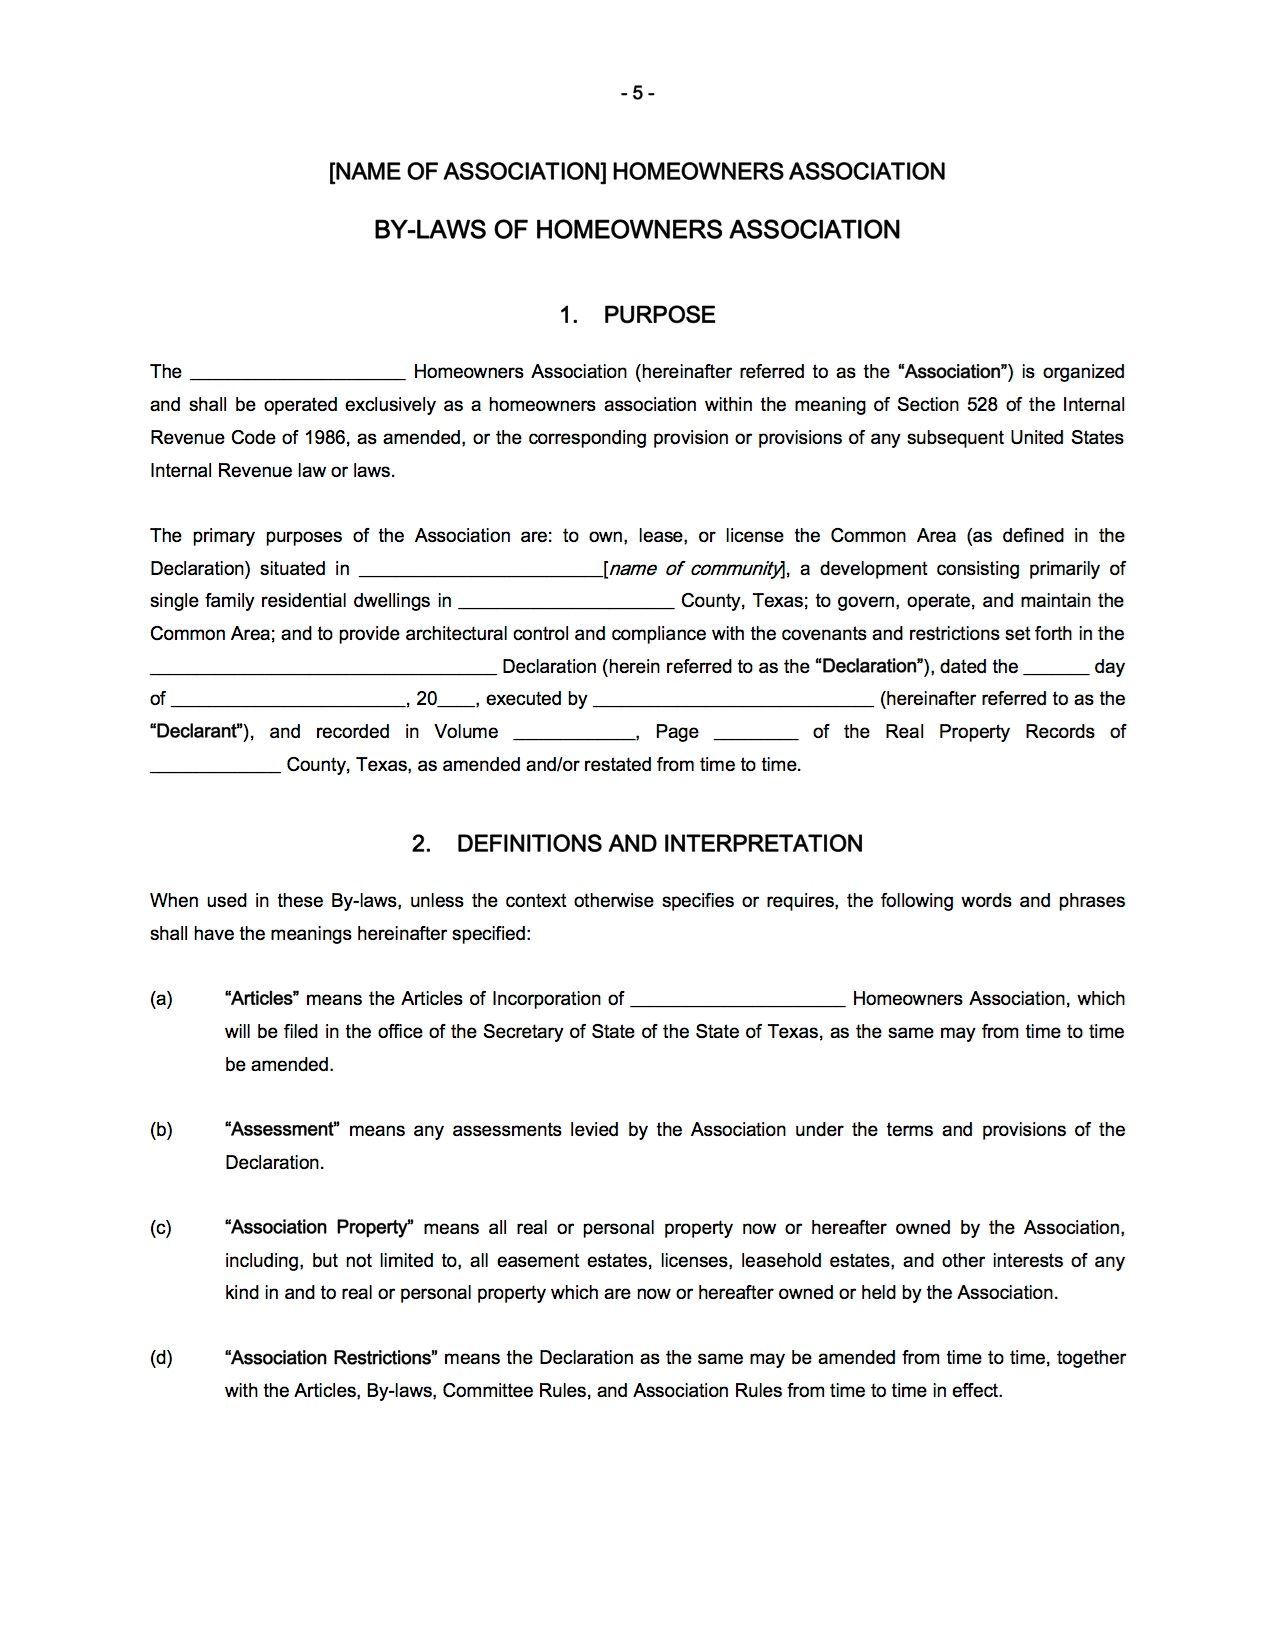 Texas Homeowners Association Bylaws Legal Forms and Business